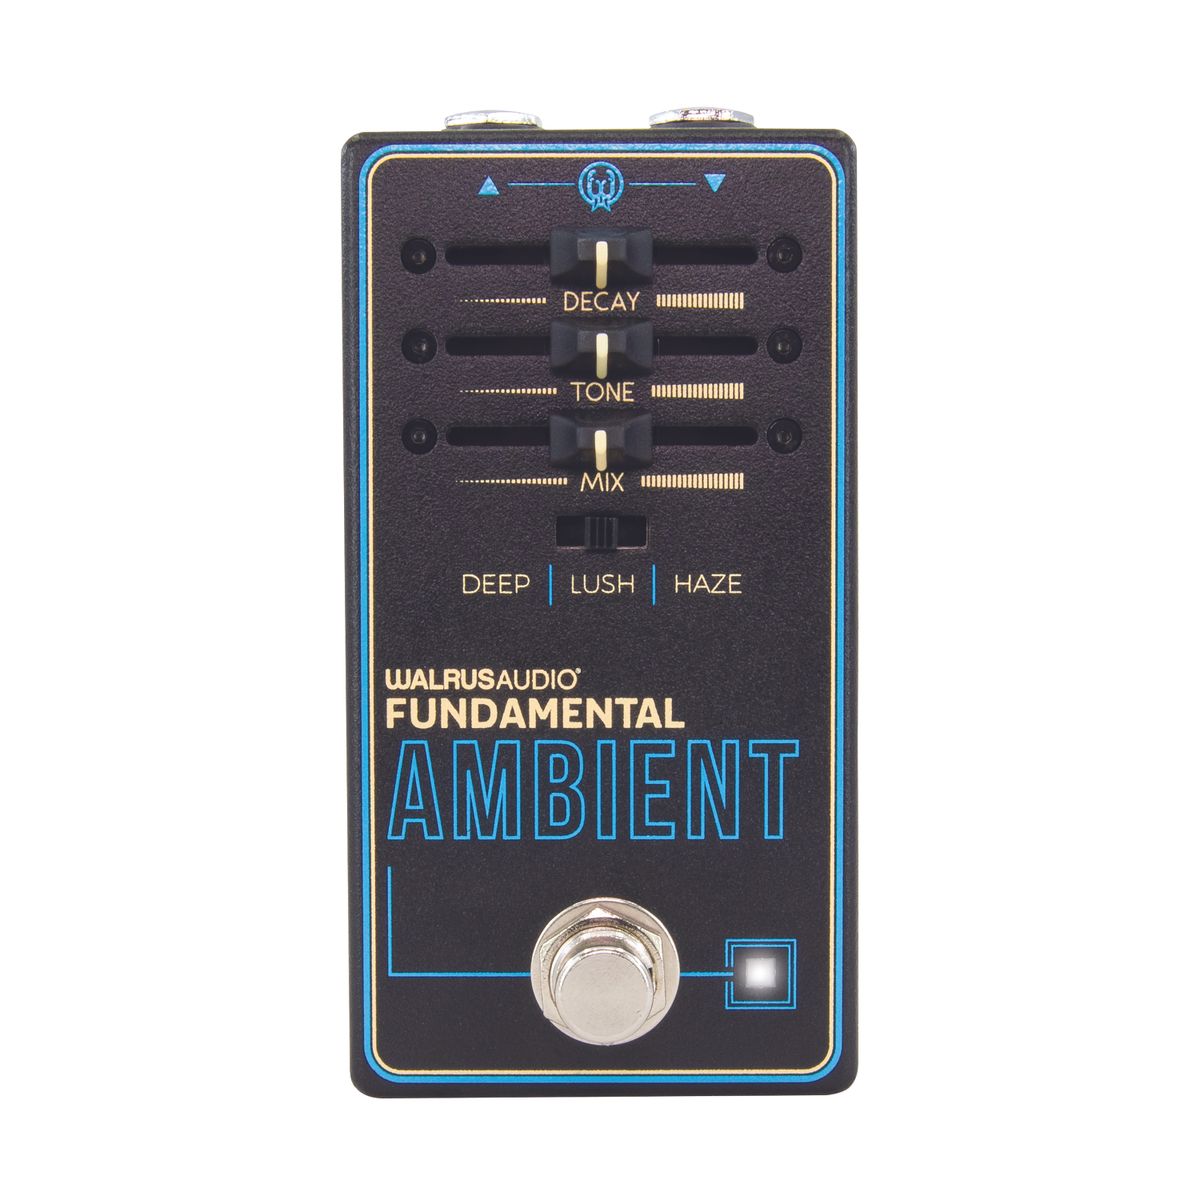 Walrus Audio Fundamental Ambient Review